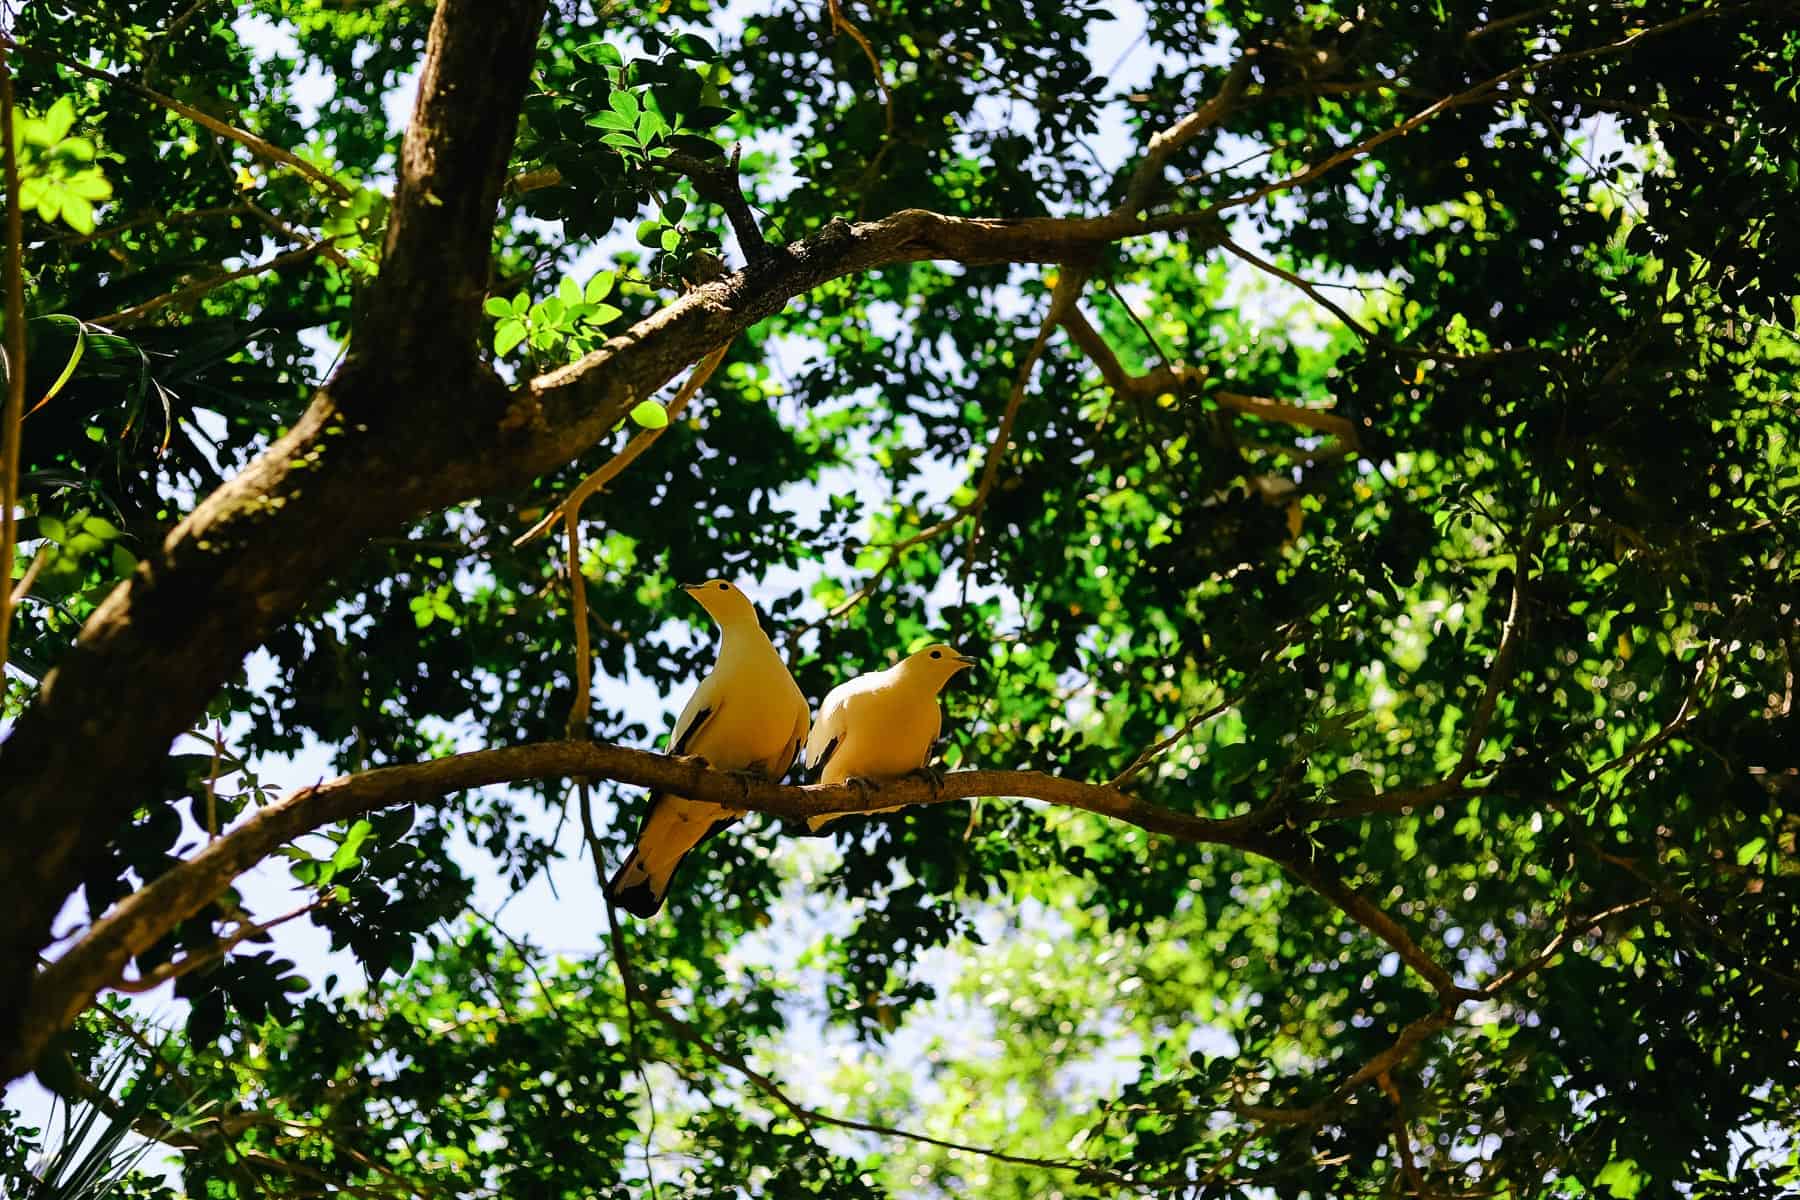 two birds sitting together in a tree in the aviary at Disney's Animal Kingdom 